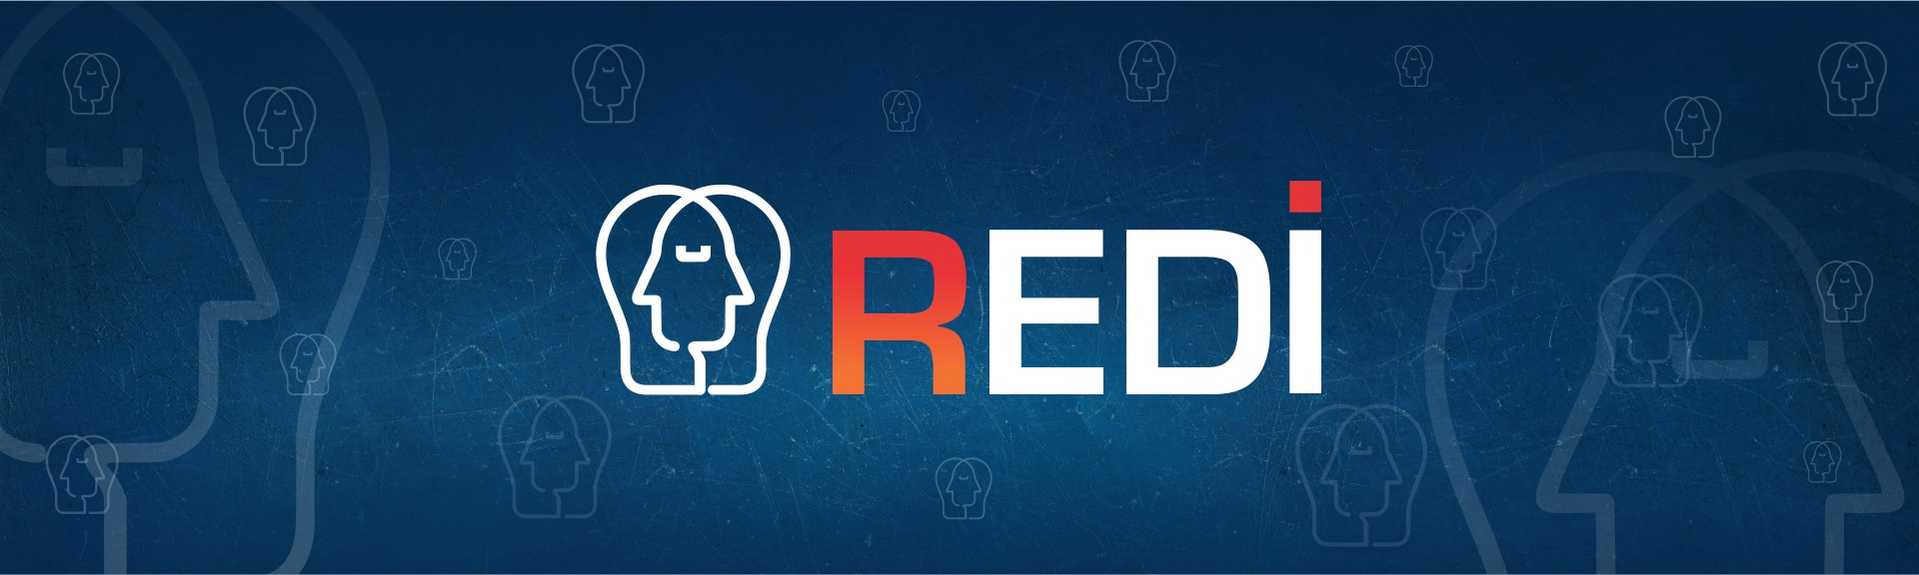 Branding of REDi, your ultimate career companion designed to help you take the next big step in your professional journey!